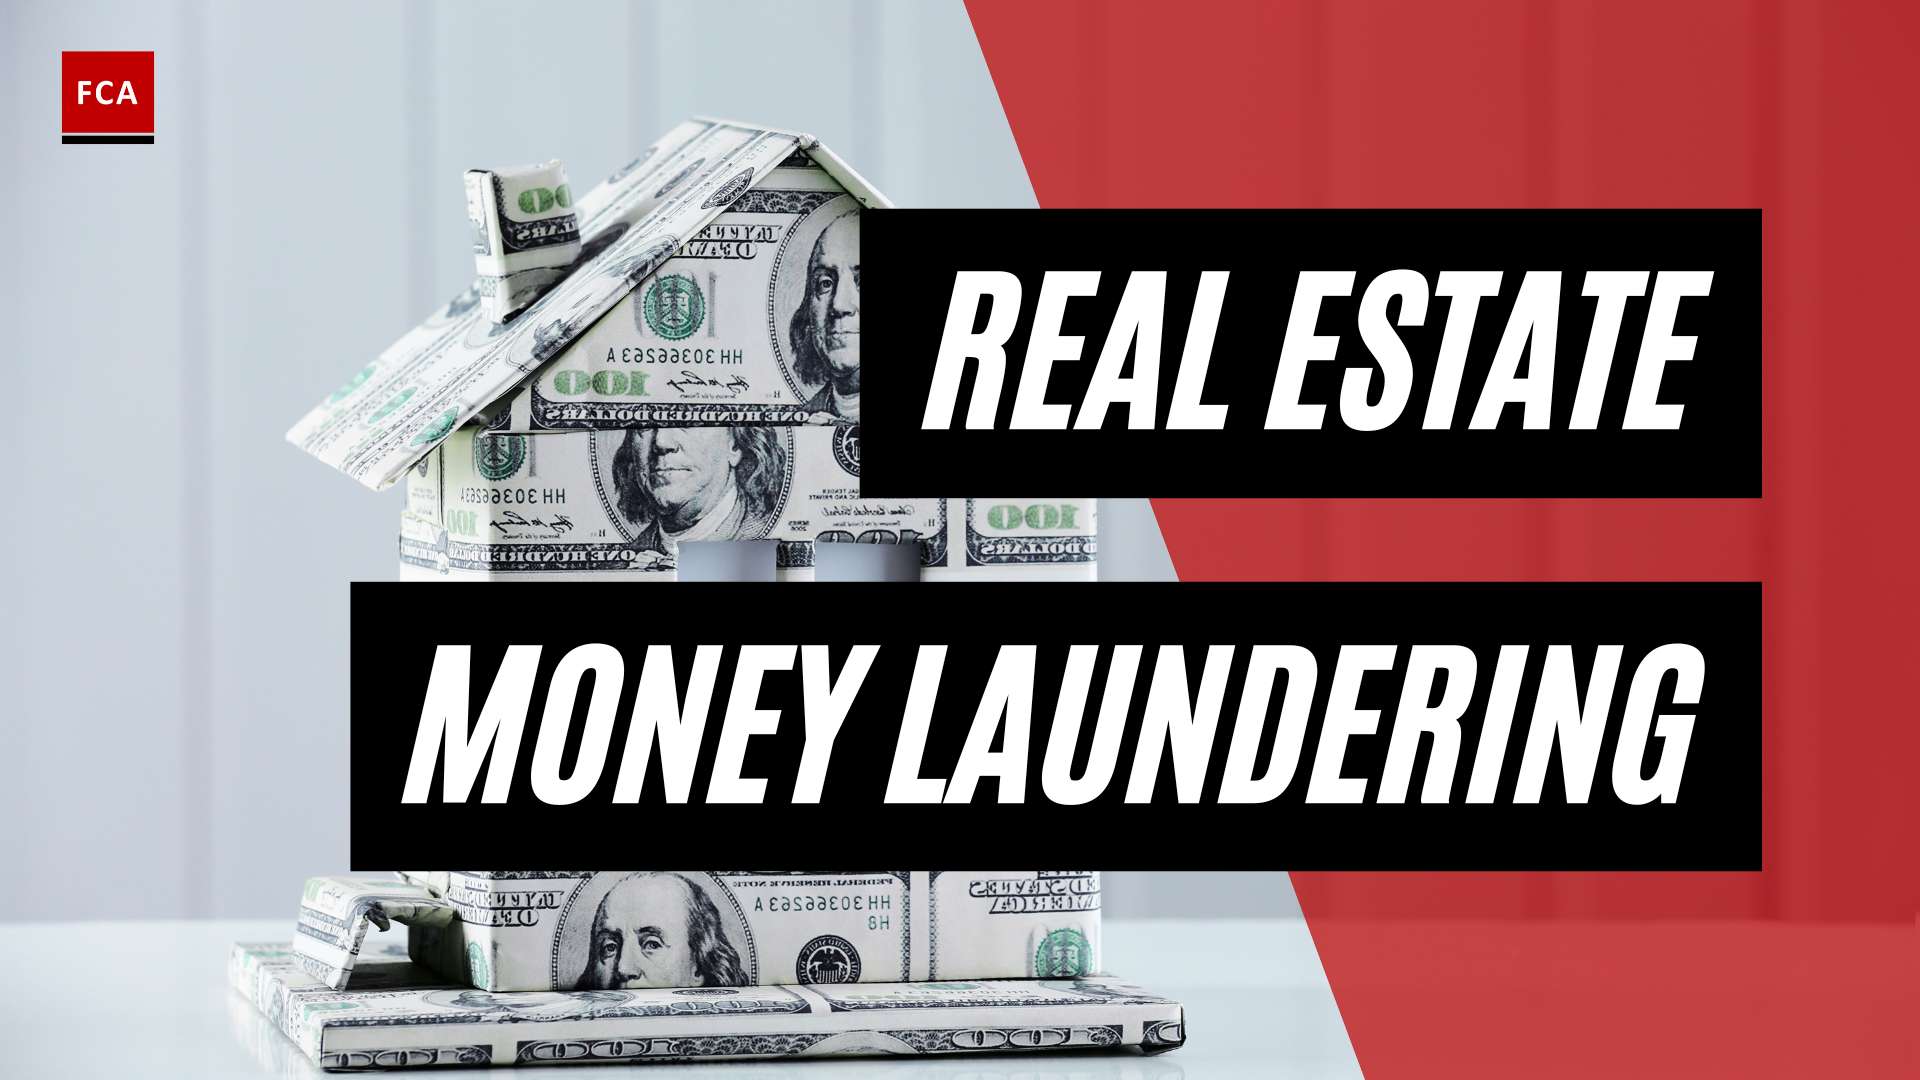 Defeating The Scheme: Strategies To Prevent Money Laundering Through Real Estate